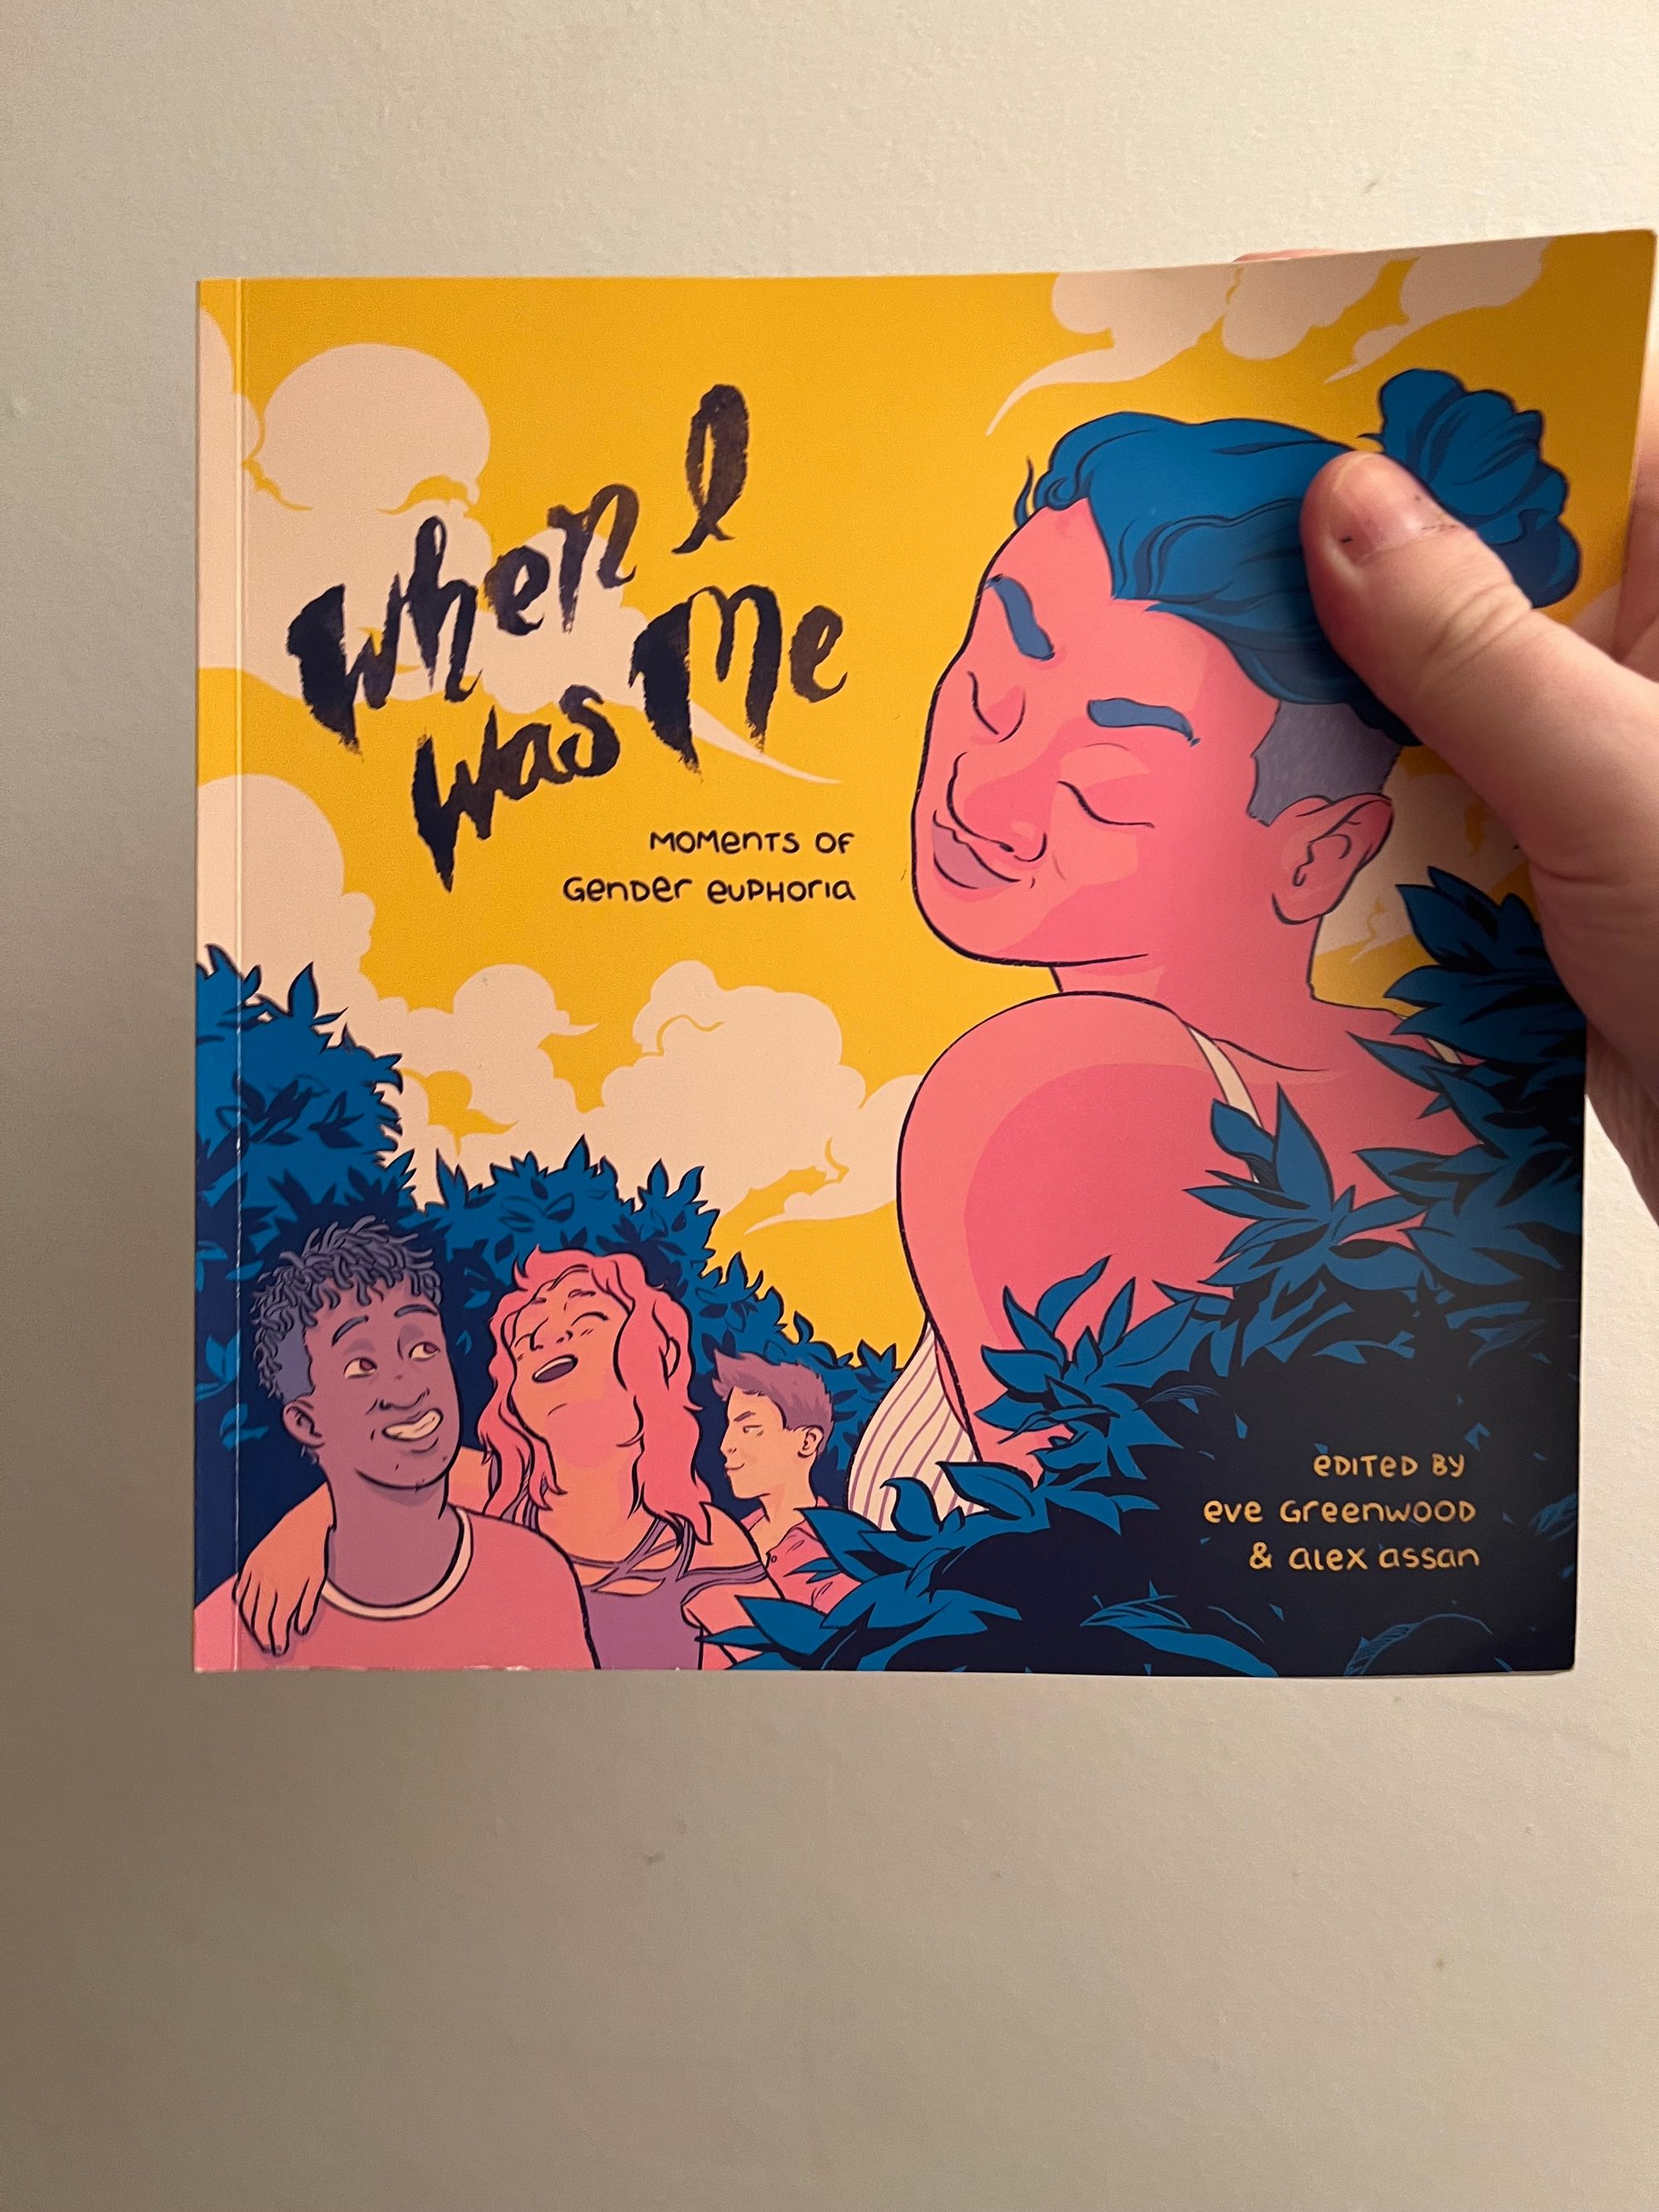 WHEN I WAS ME: MOMENTS OF GENDER EUPHORIA, edited by Eve Greenwood and Alex Assan.